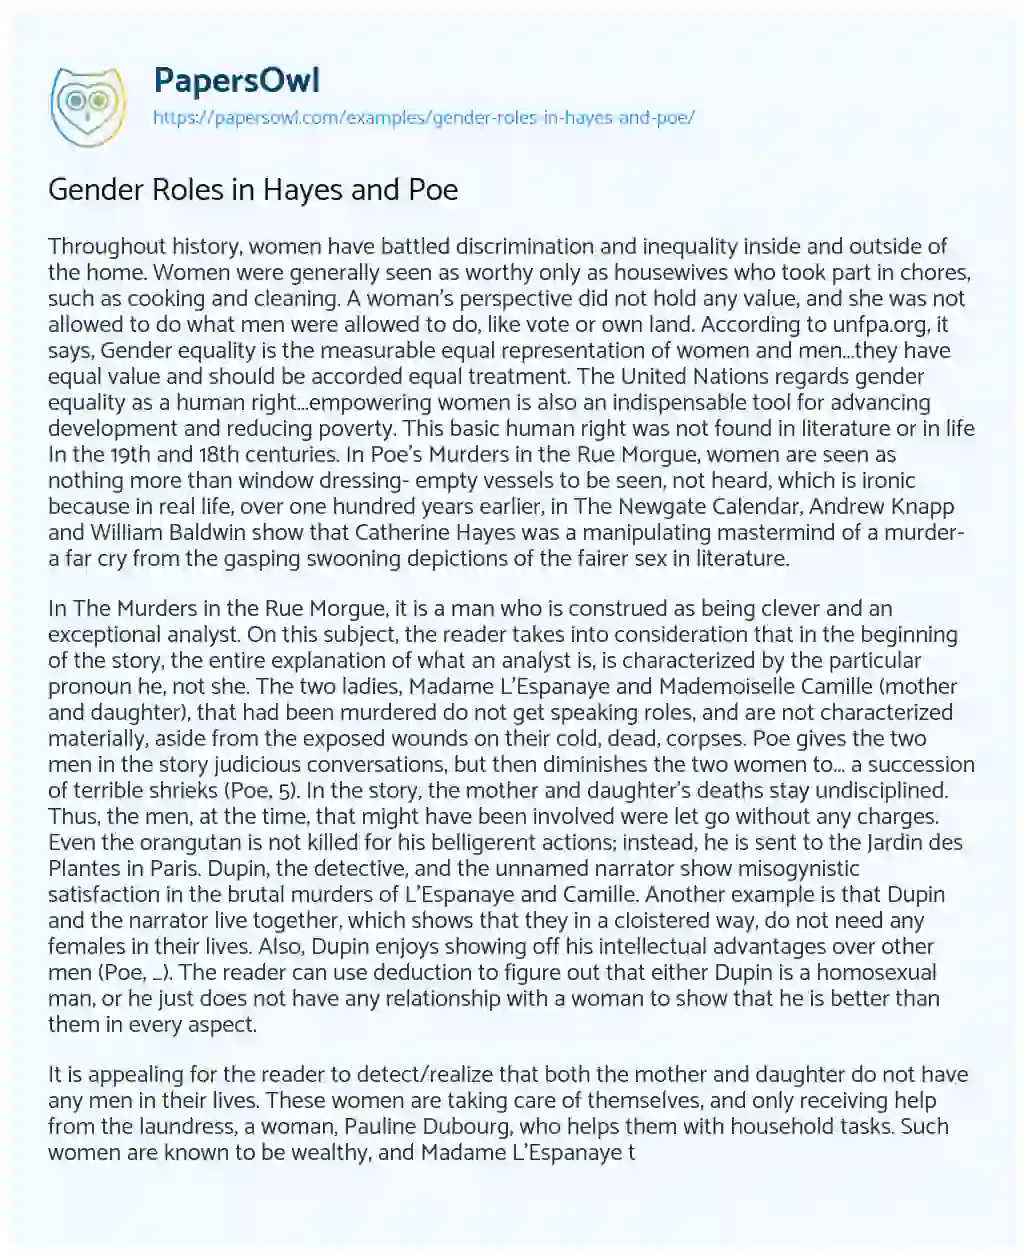 Essay on Gender Roles in Hayes and Poe